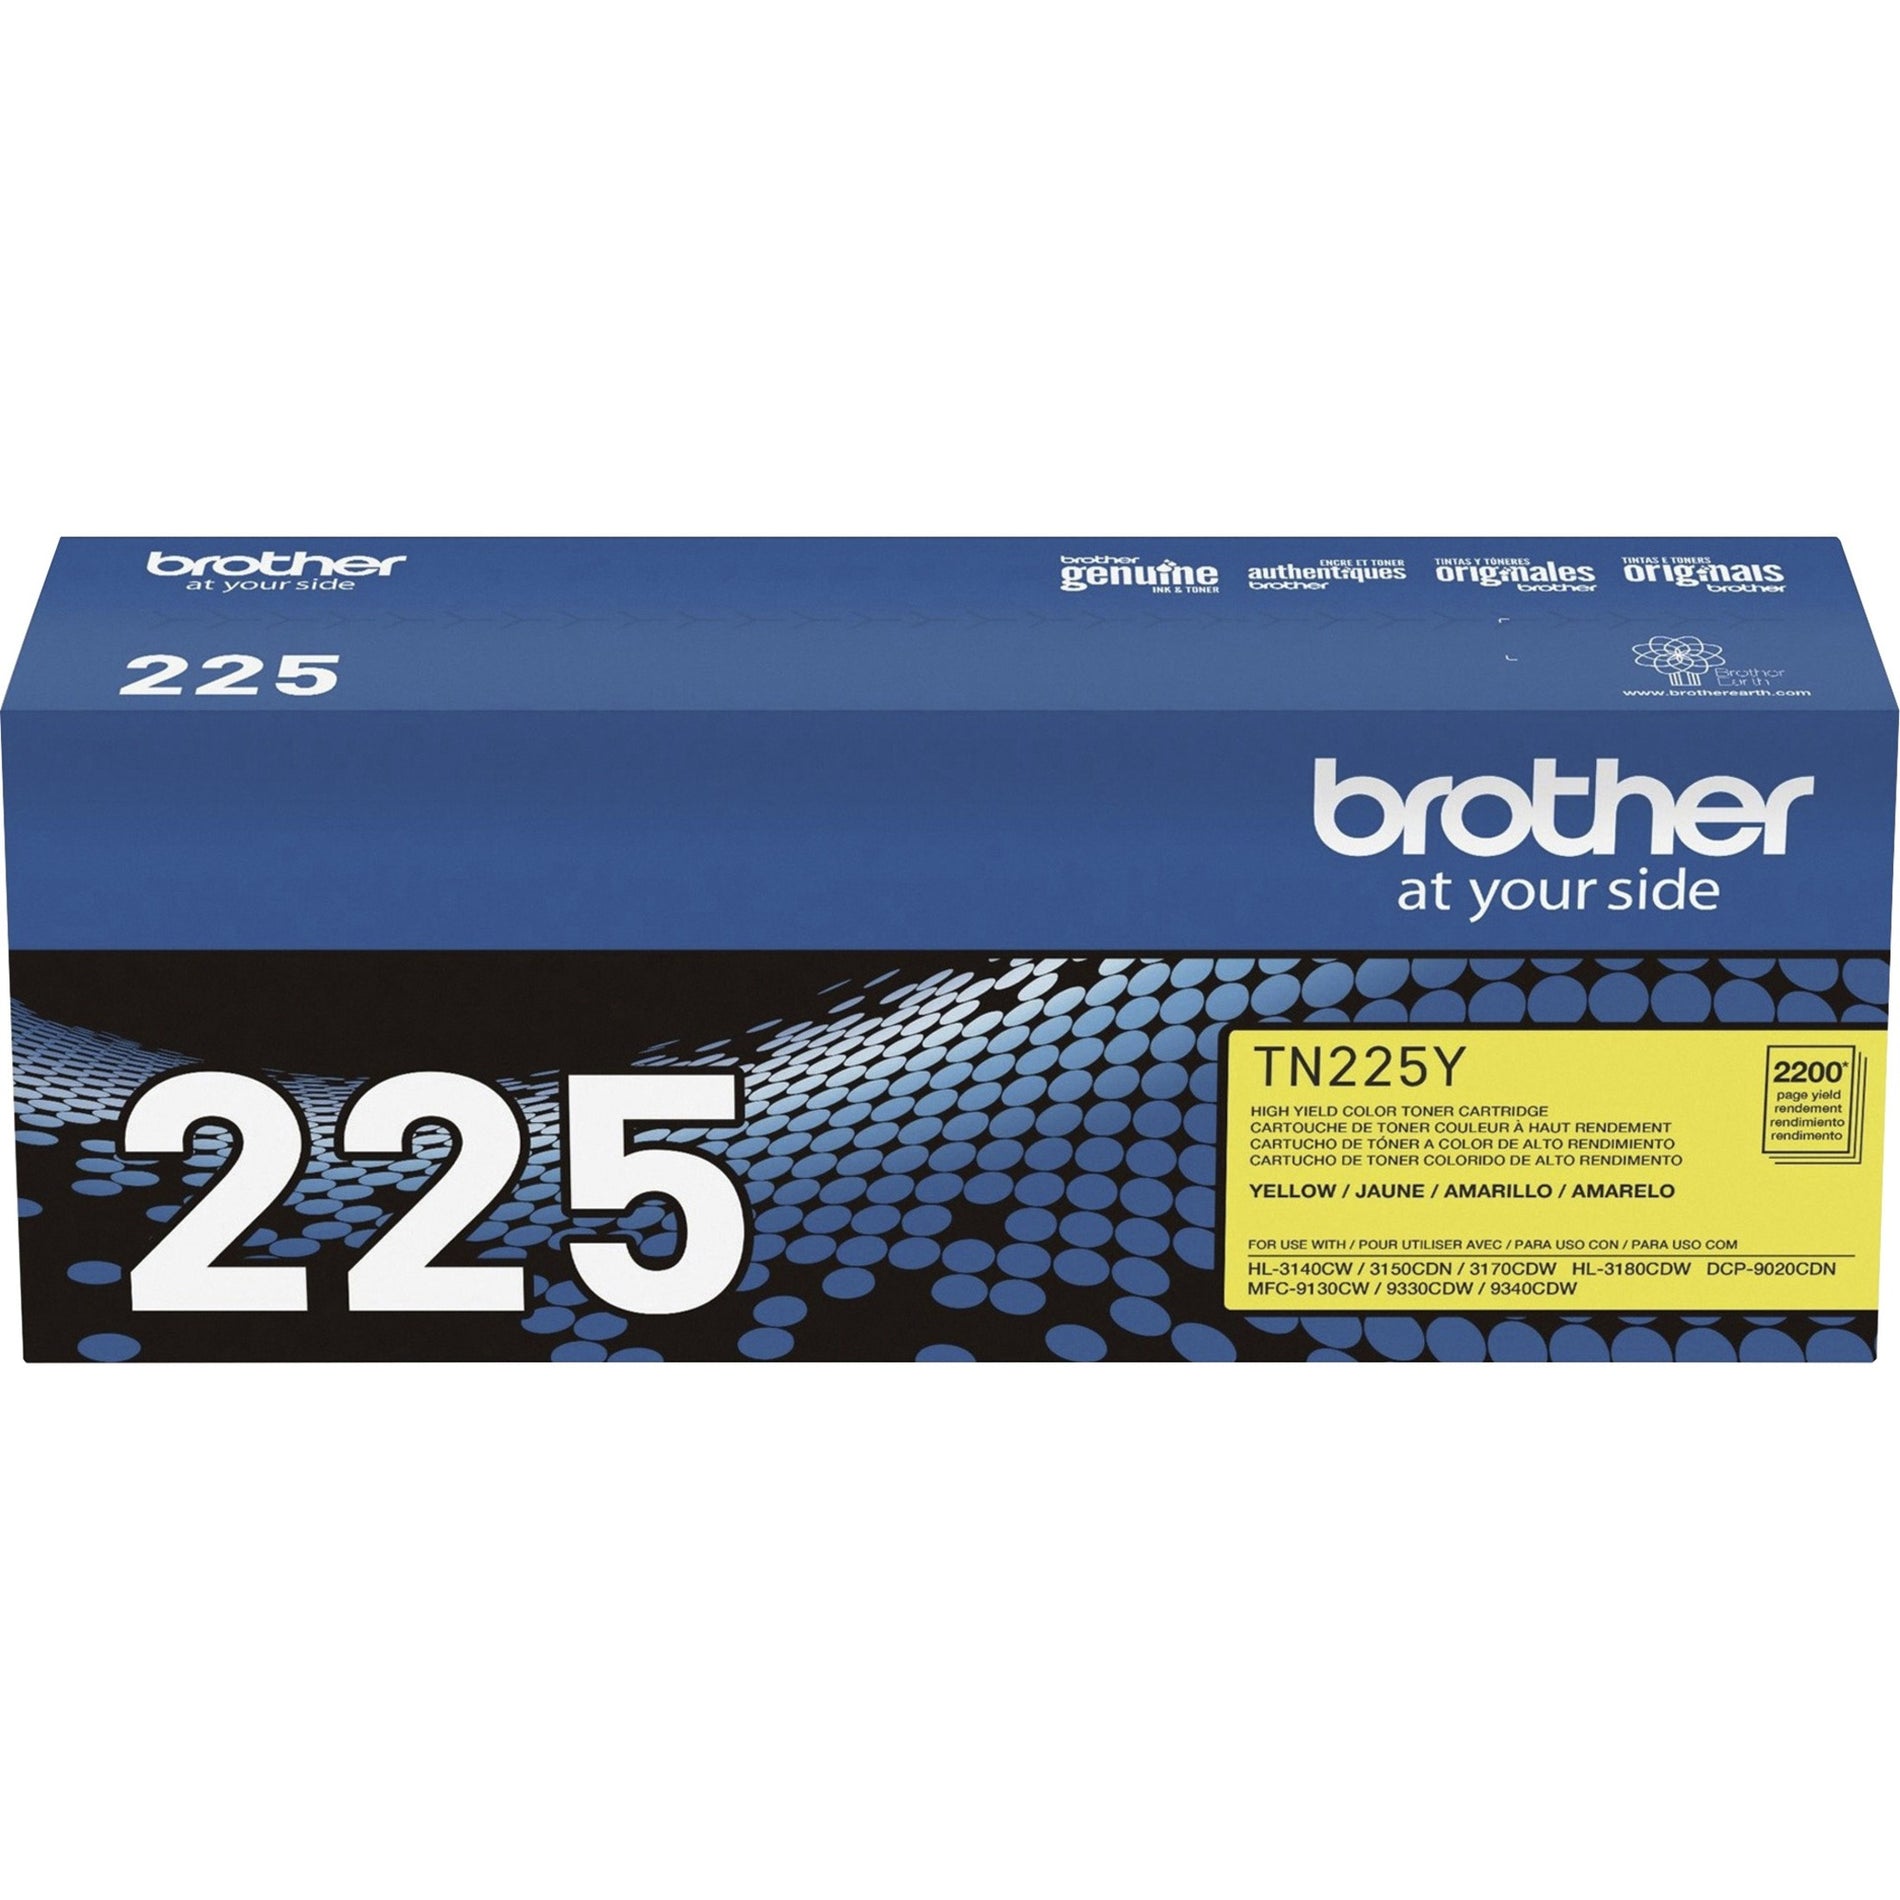 Brother TN225Y Toner Cartridge, High Yield, Yellow, 2200 Page Yield